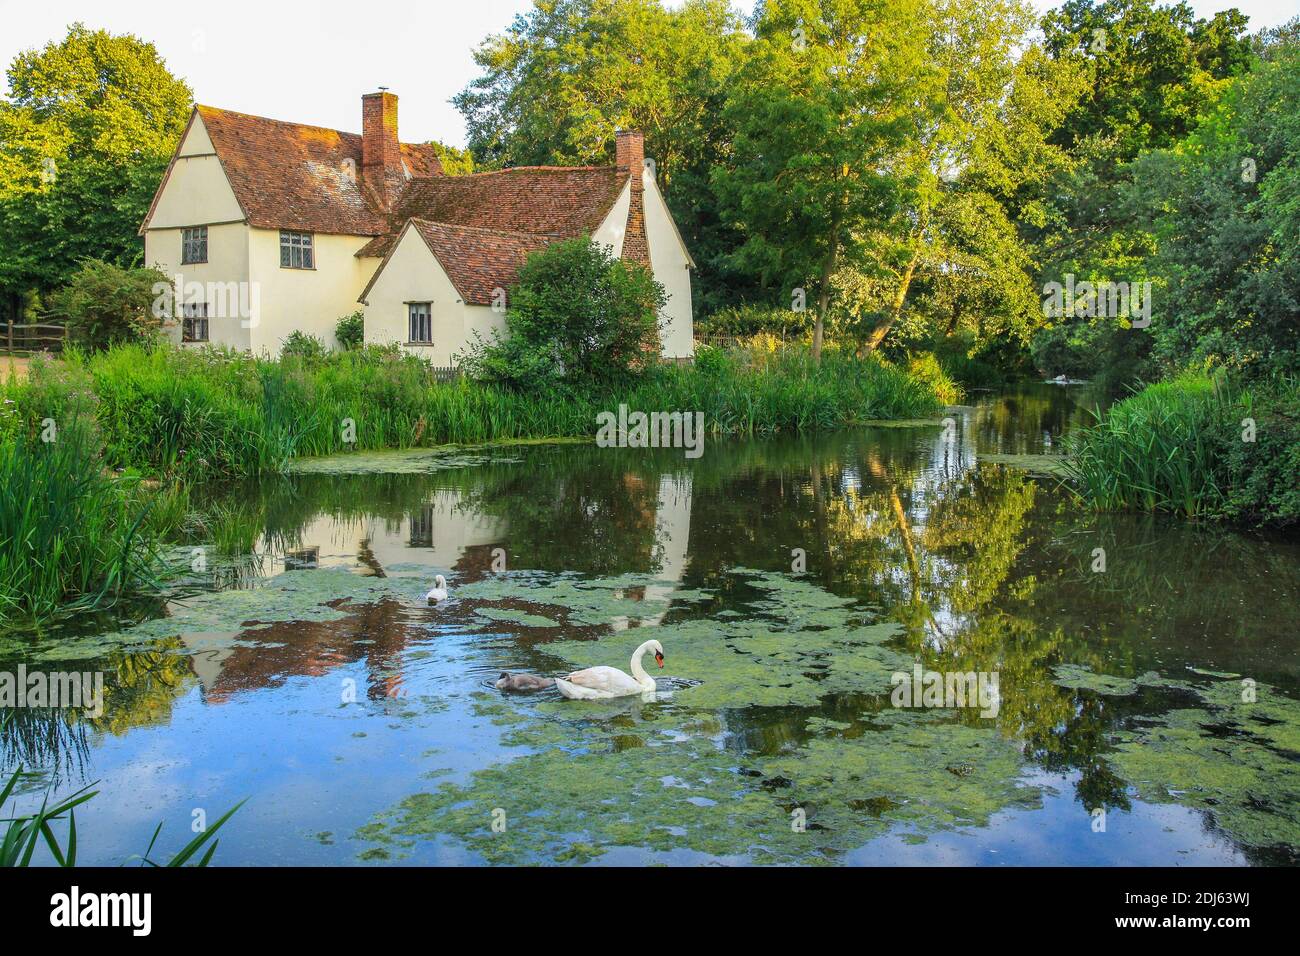 Willy Lott's house / cottage on the river Stour at Flatford mill East Bergholt Suffolk as seen in John Constable's Hay Wain Stock Photo